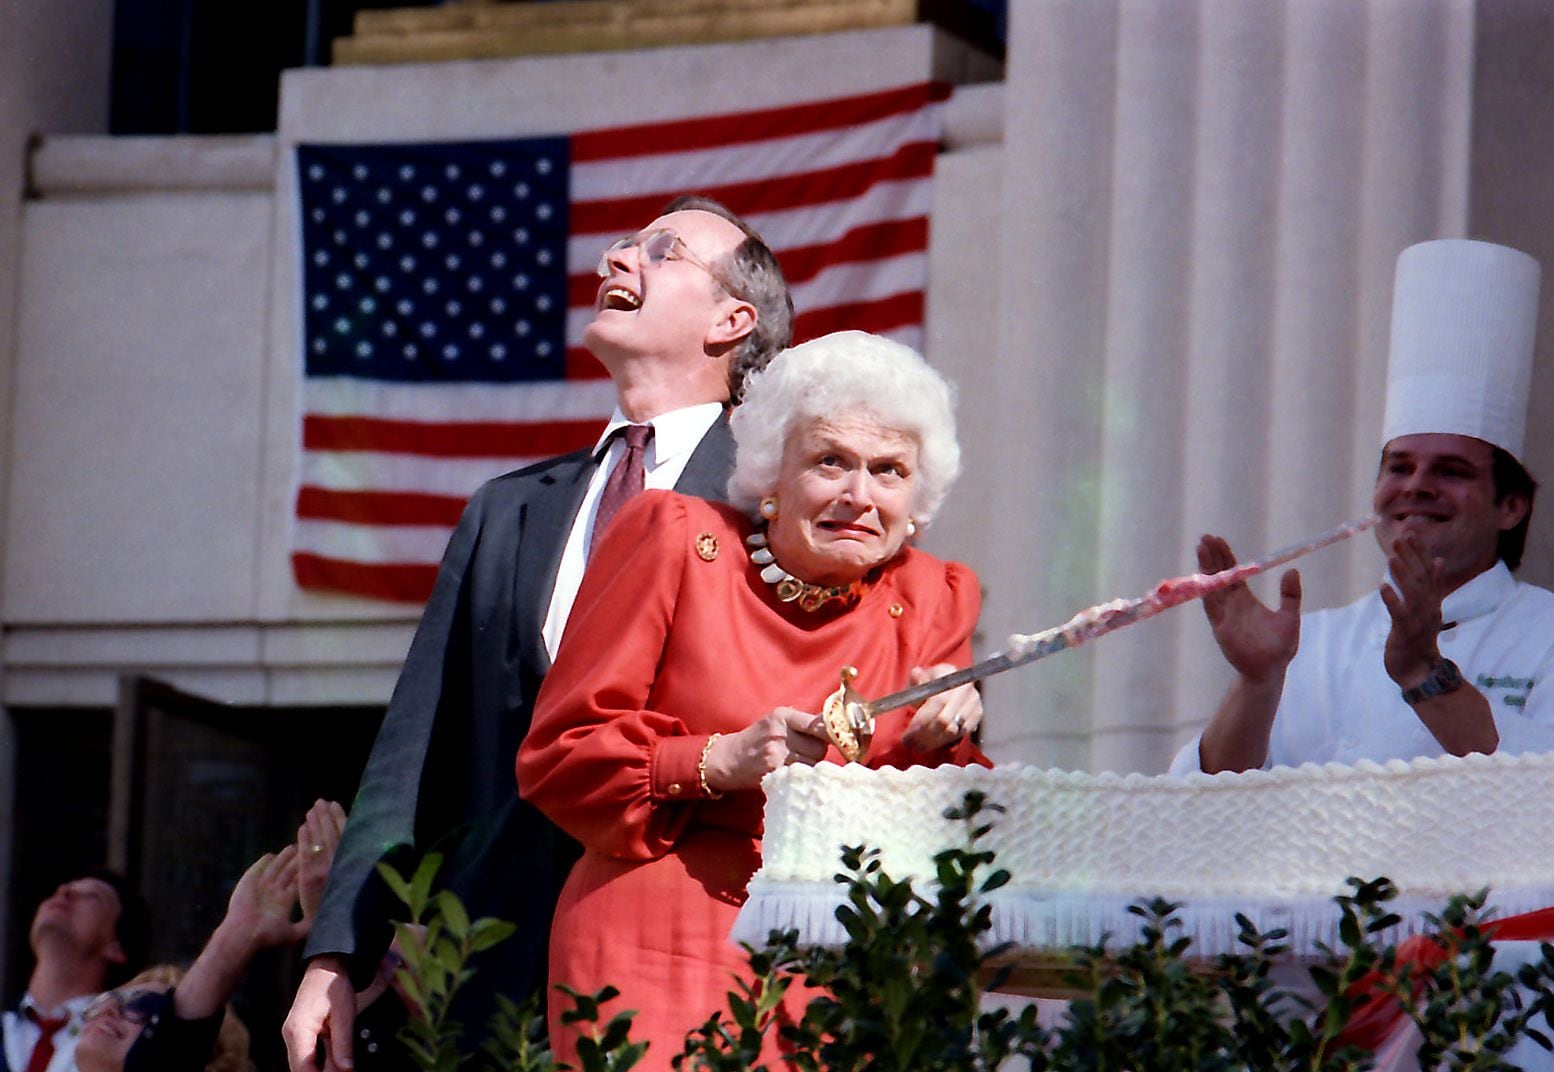 Barbara Bush cringes as a low-flying jet ceremonially passes overhead during cake-cutting...